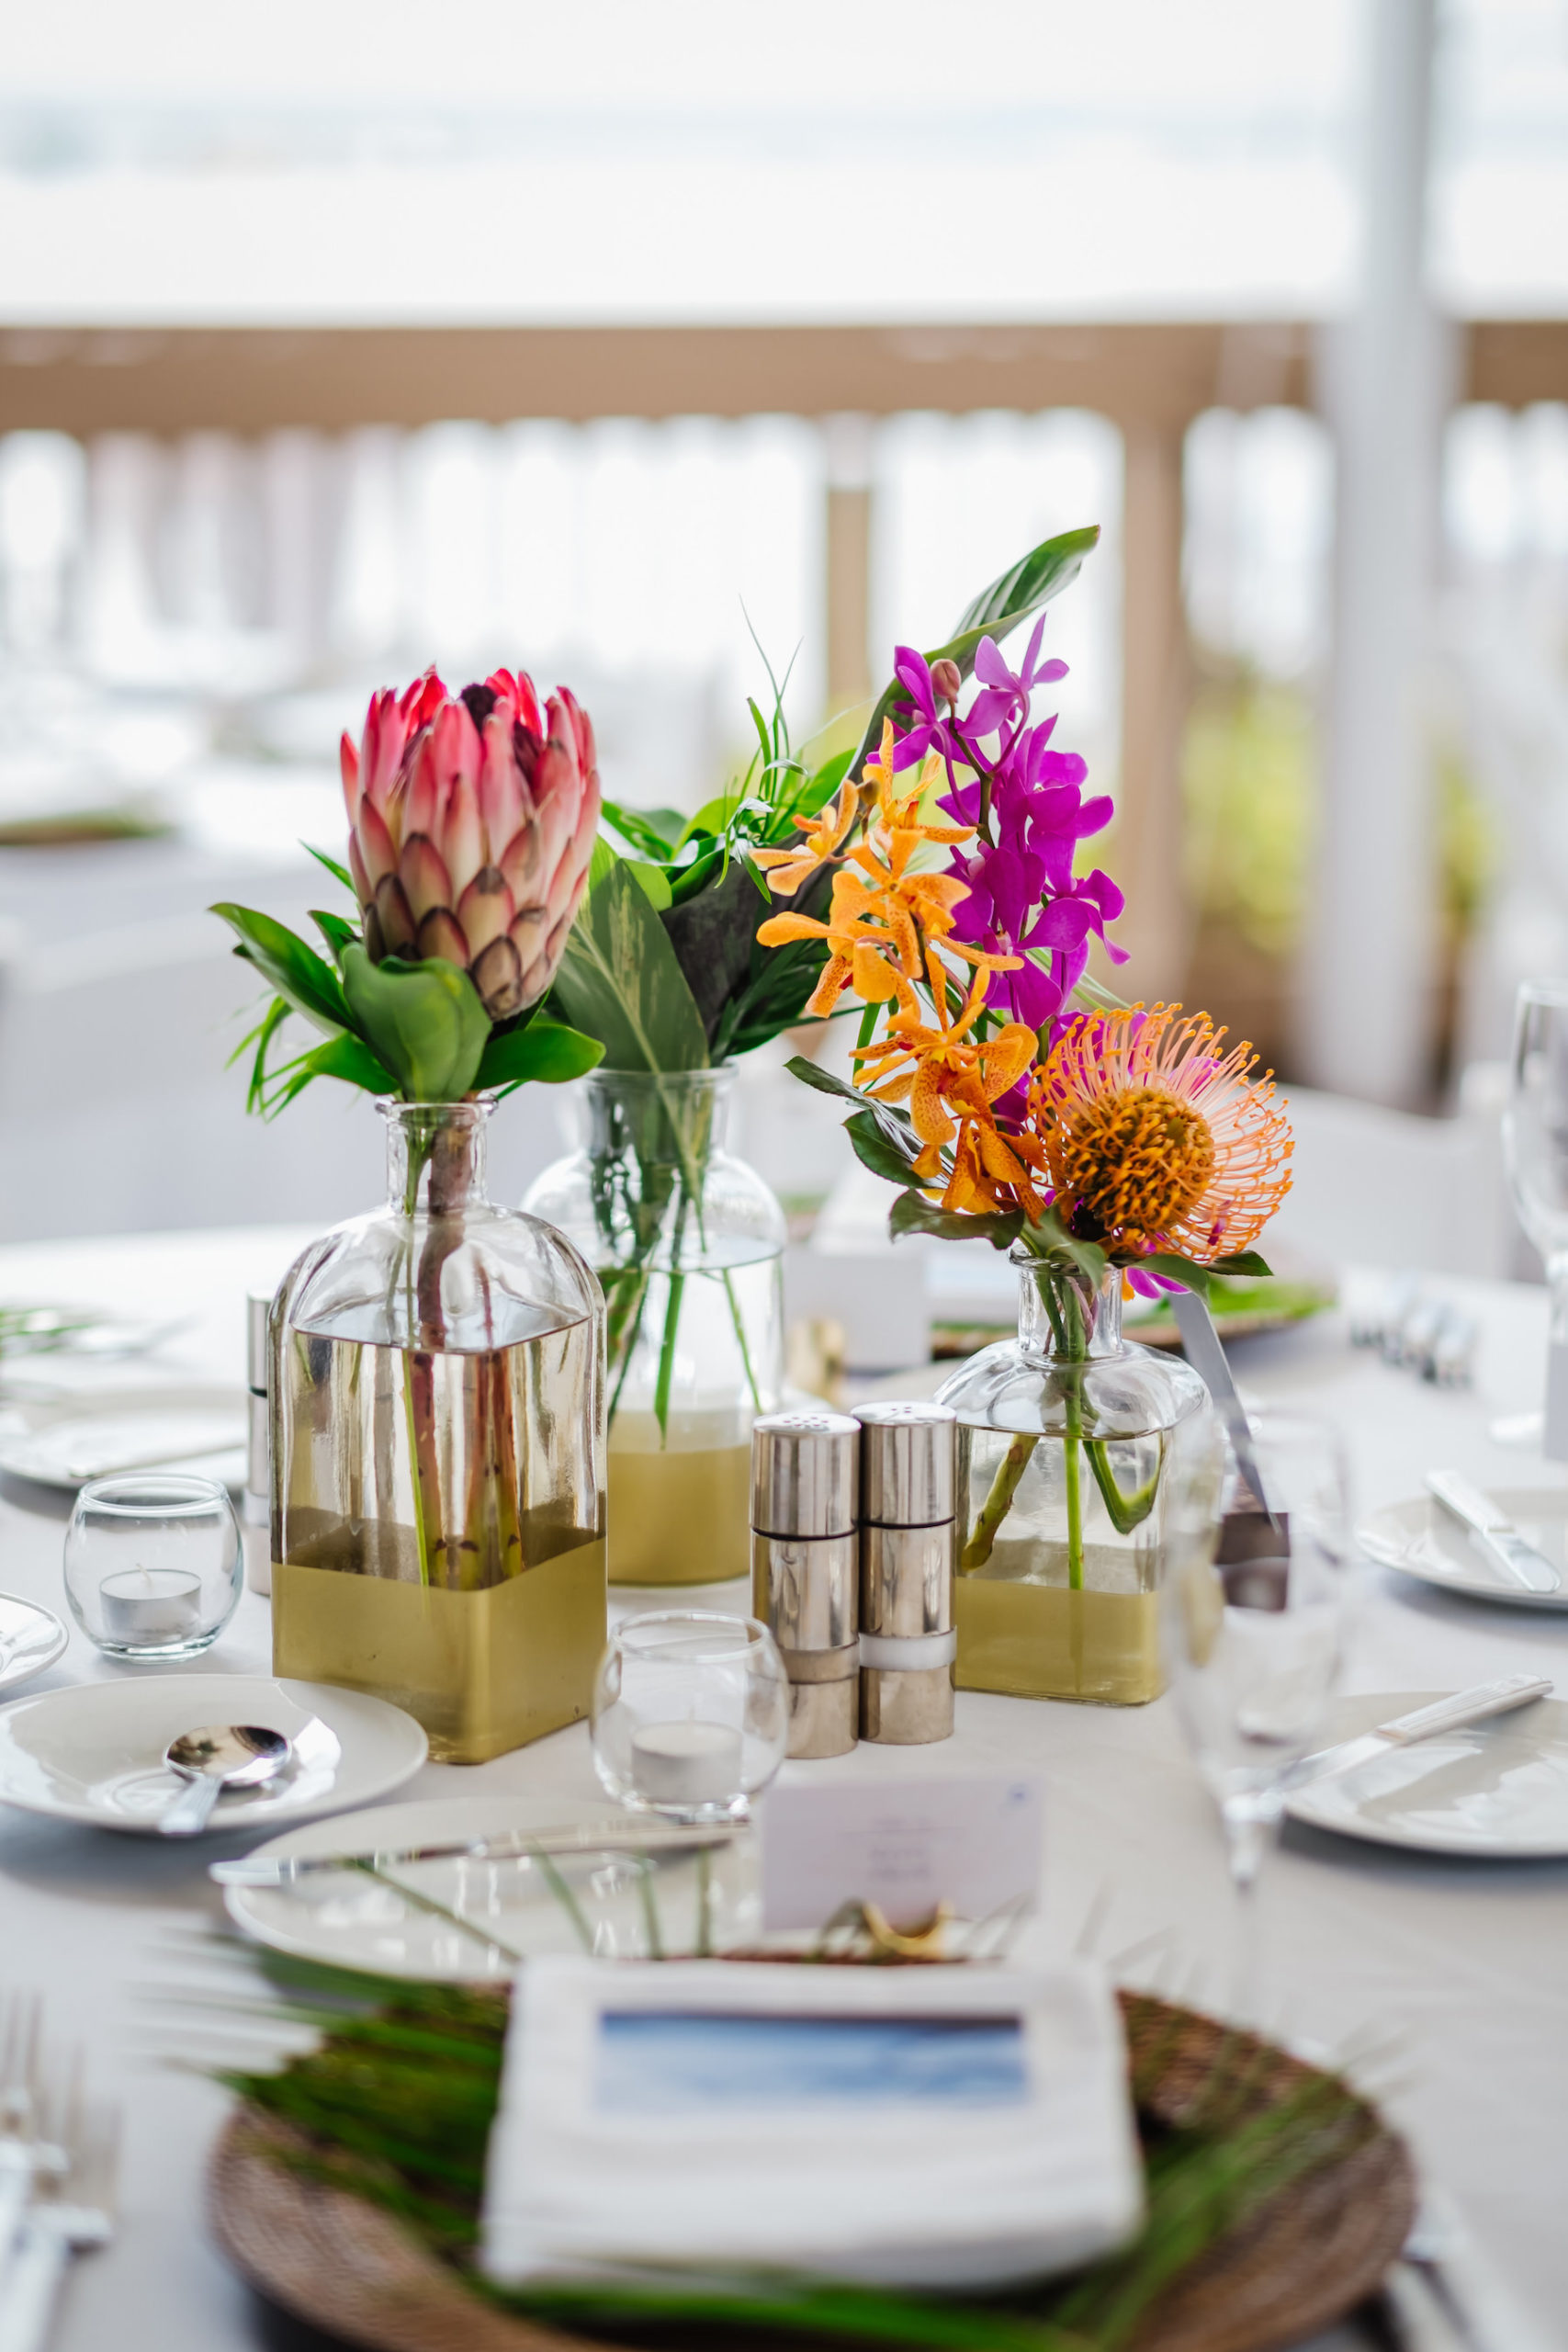 Tropical Wedding Reception Decor, Small Gold and Clear Vases with King Protea, Orange and Purple Flowers and Palm Leaves Centerpieces